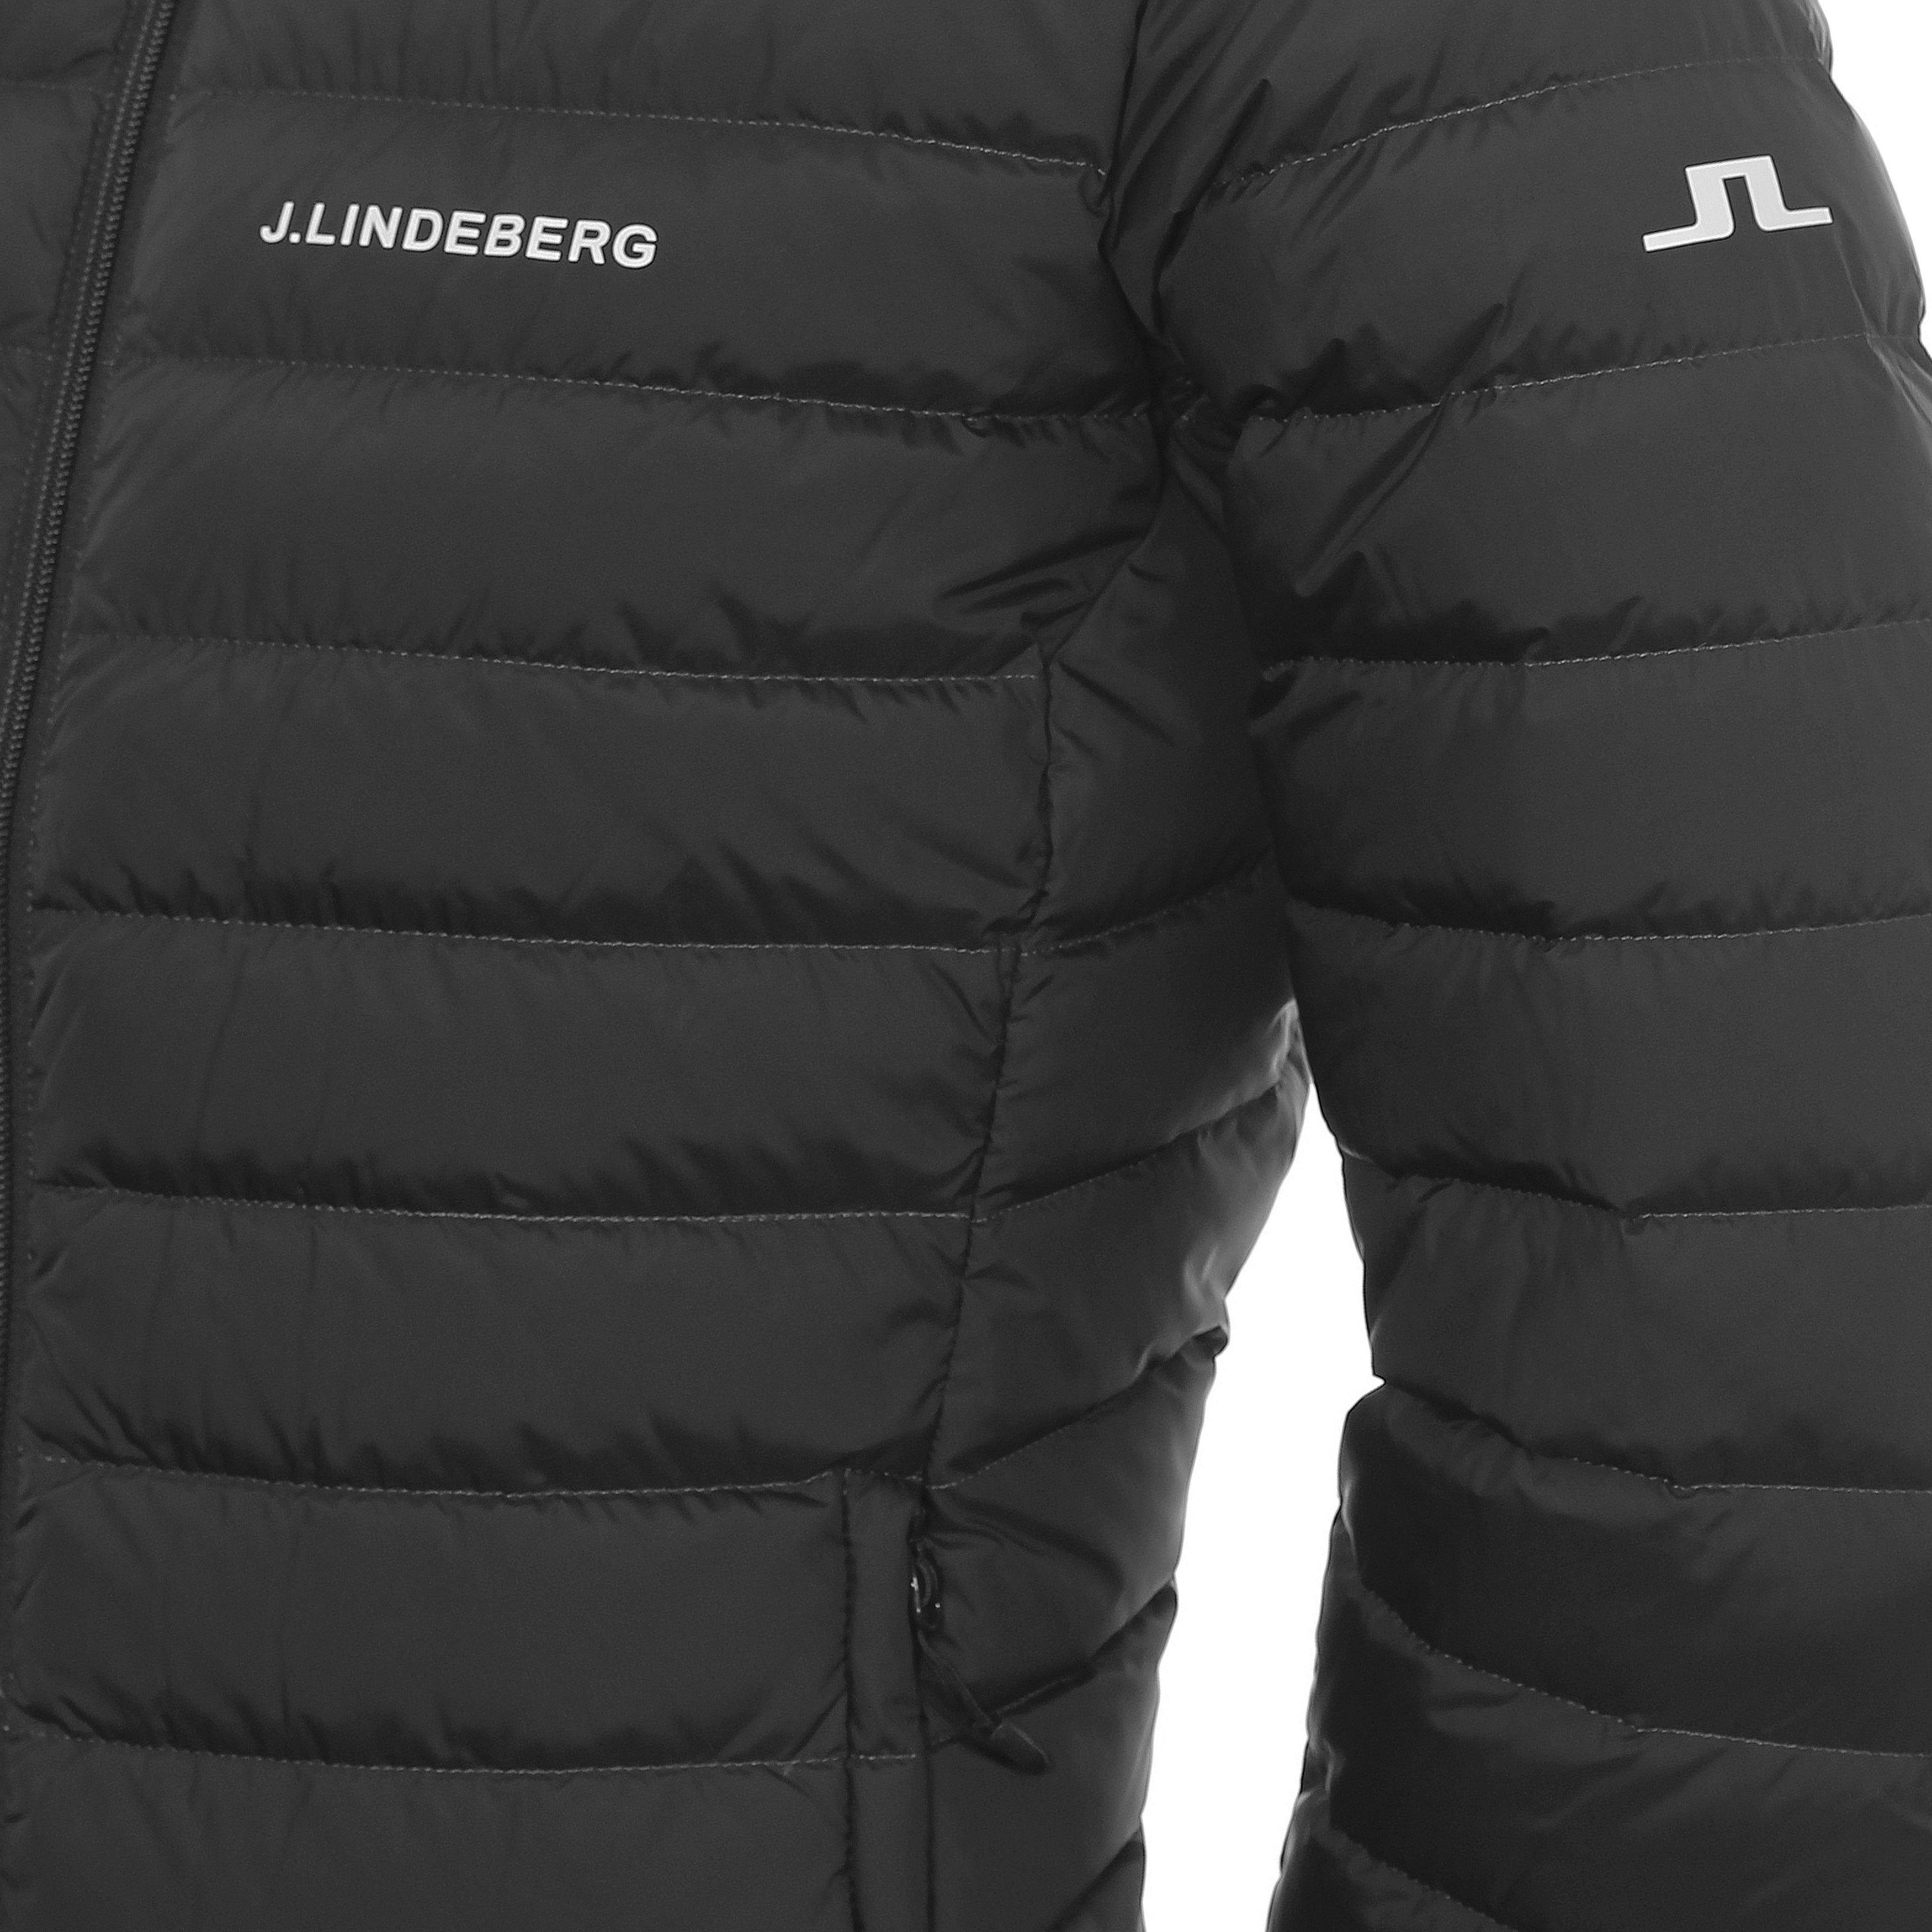 J.Lindeberg Thermic Down Jacket SMOW04284 9999 | Function18